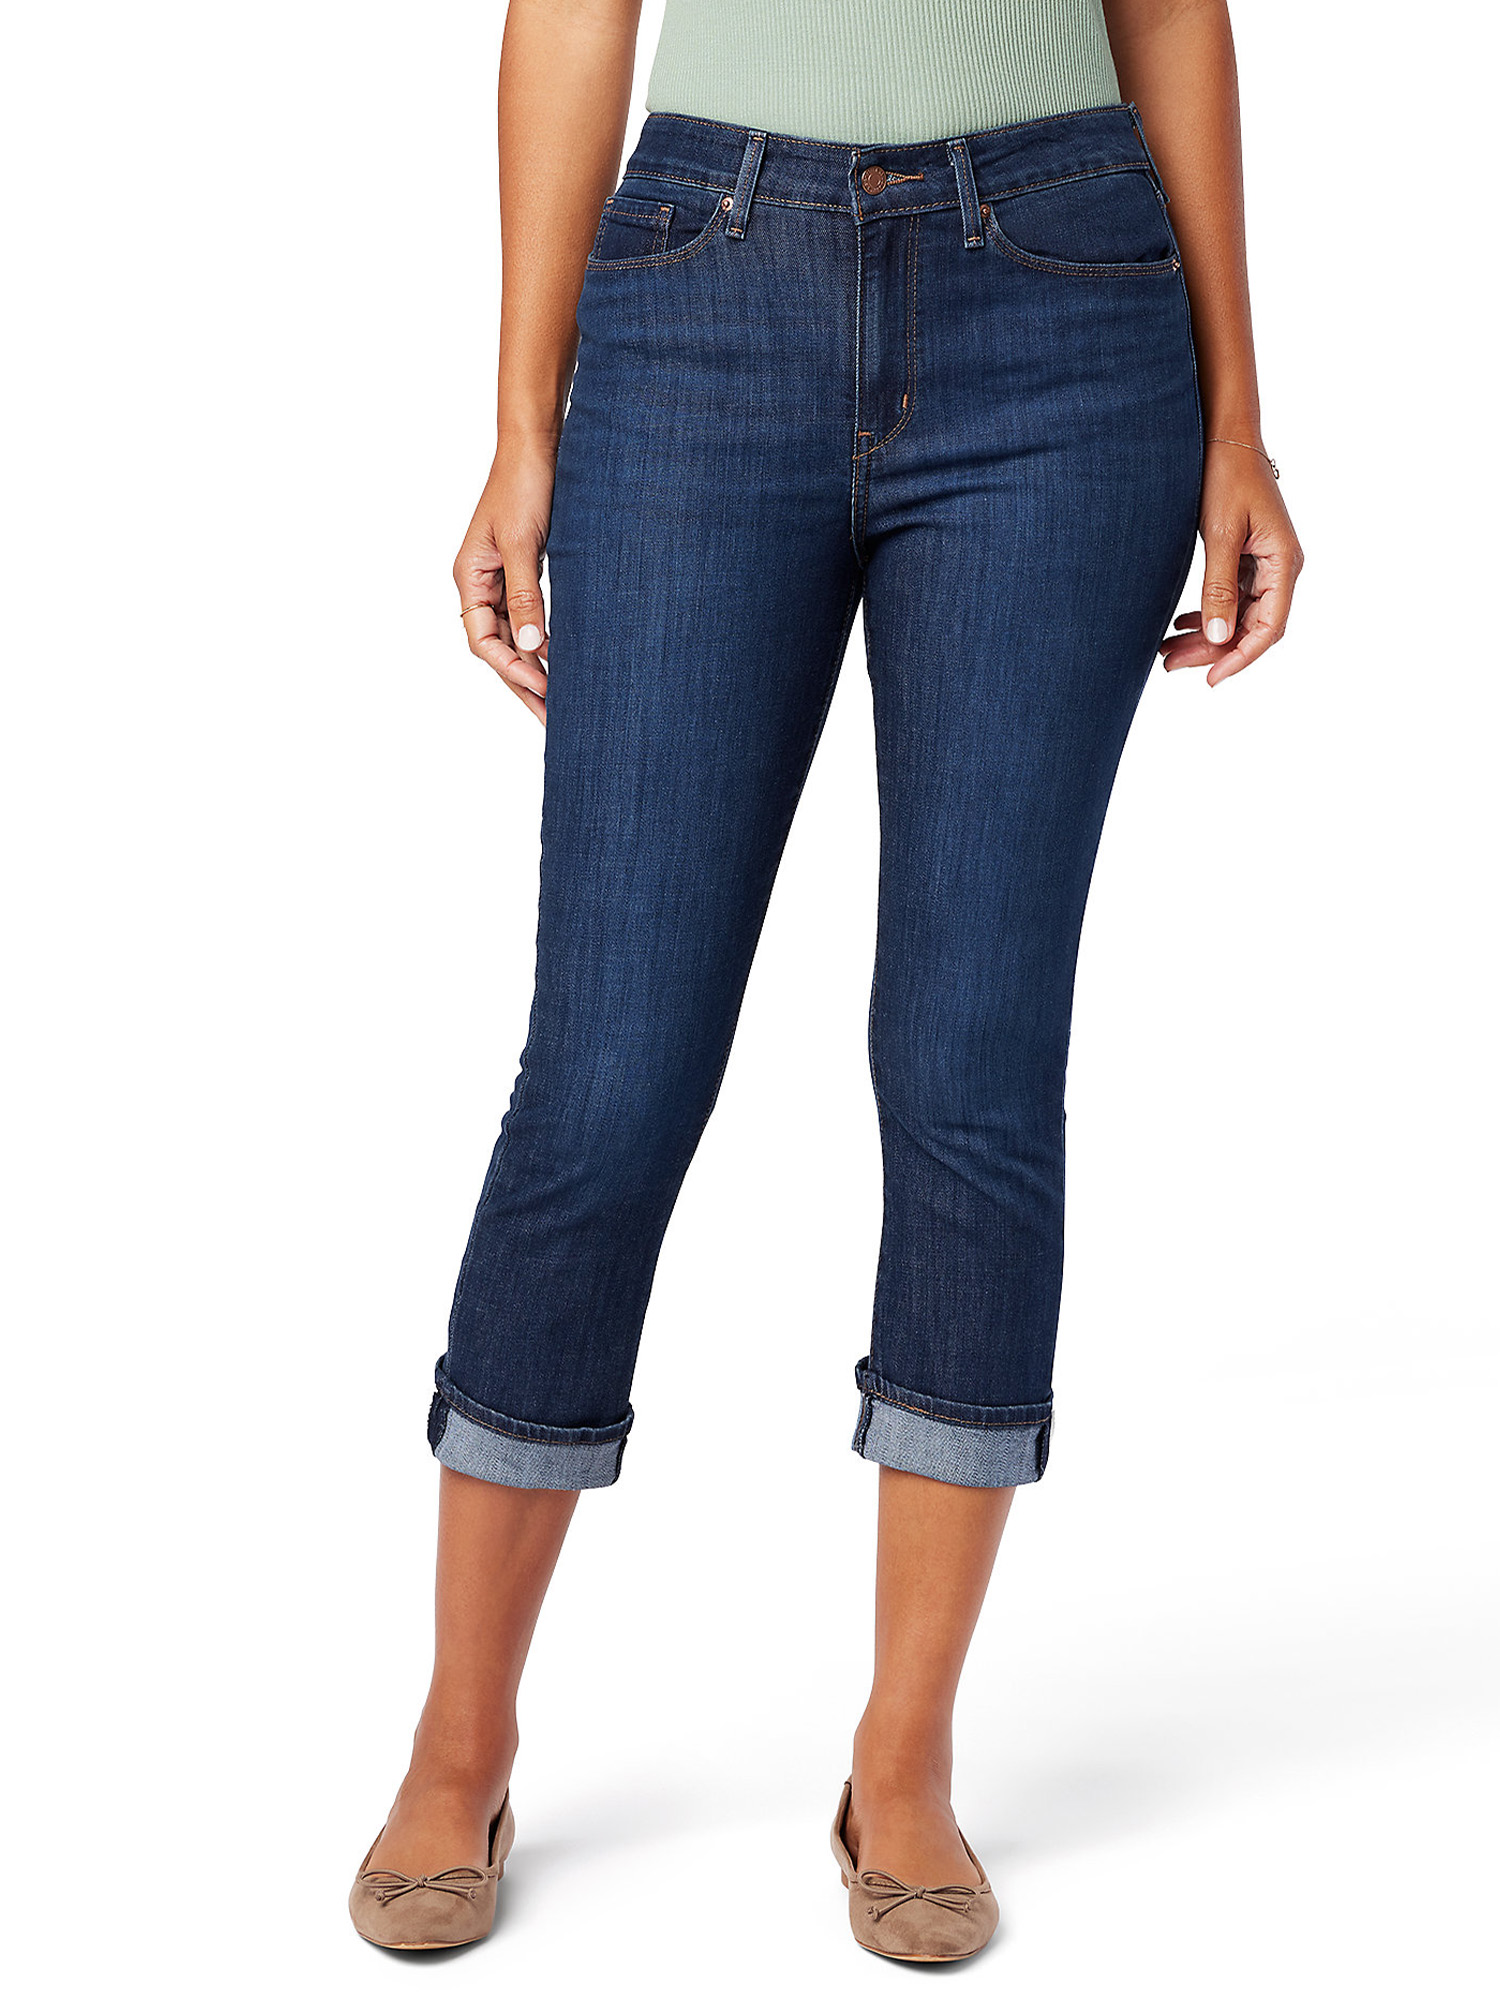 Signature by Levi Strauss & Co. Women's and Women's Plus Mid Rise Capri Jeans, Sizes 0-28 - image 1 of 5